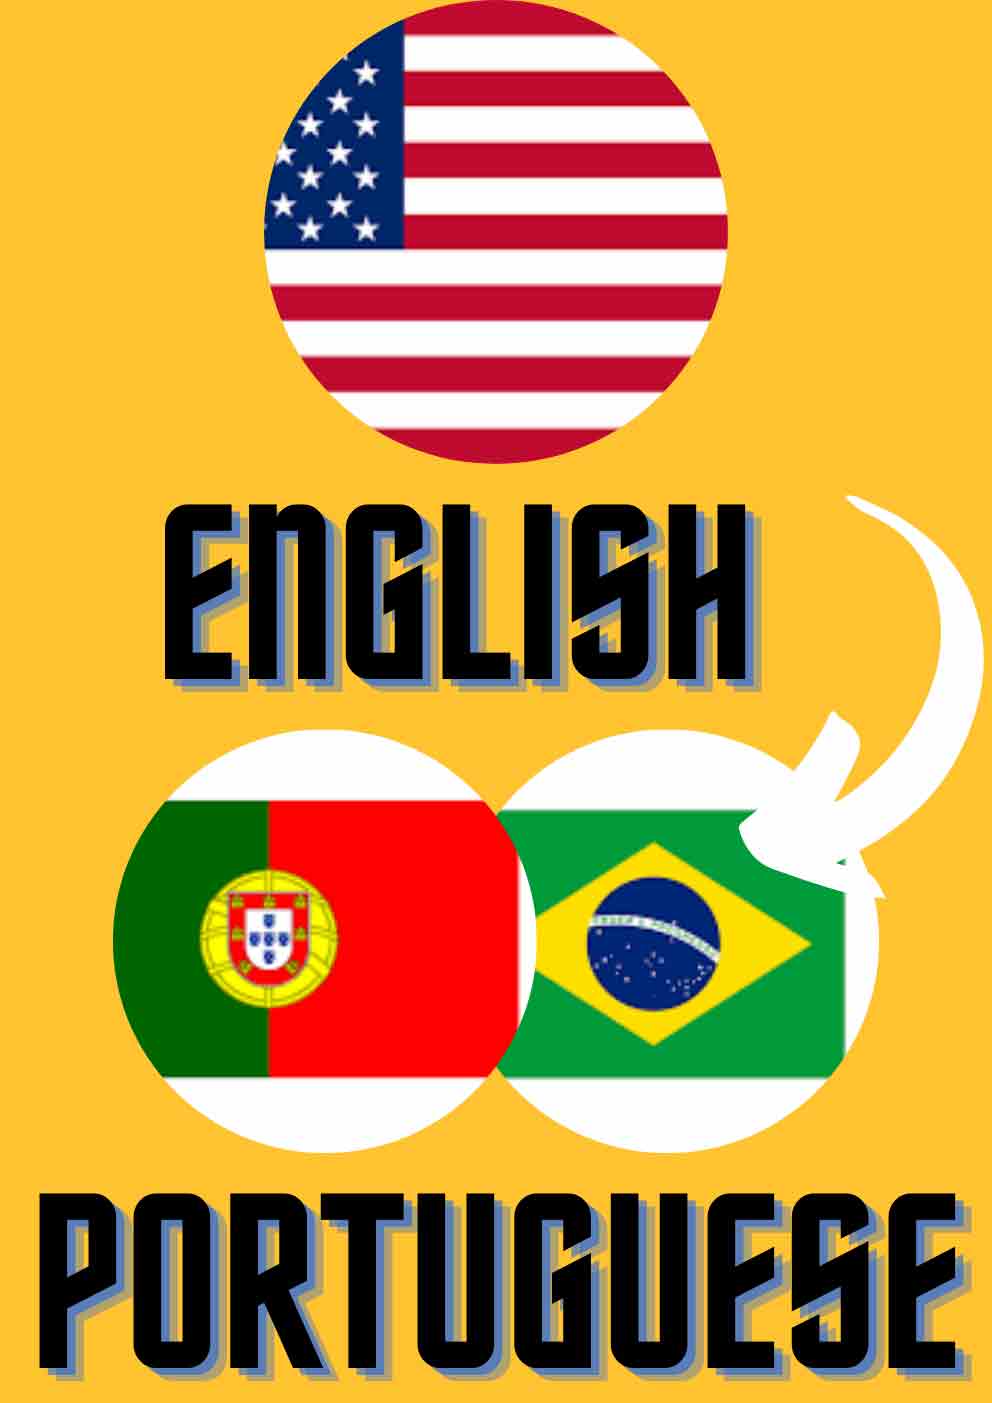 English-to-portuguese-certified-translation